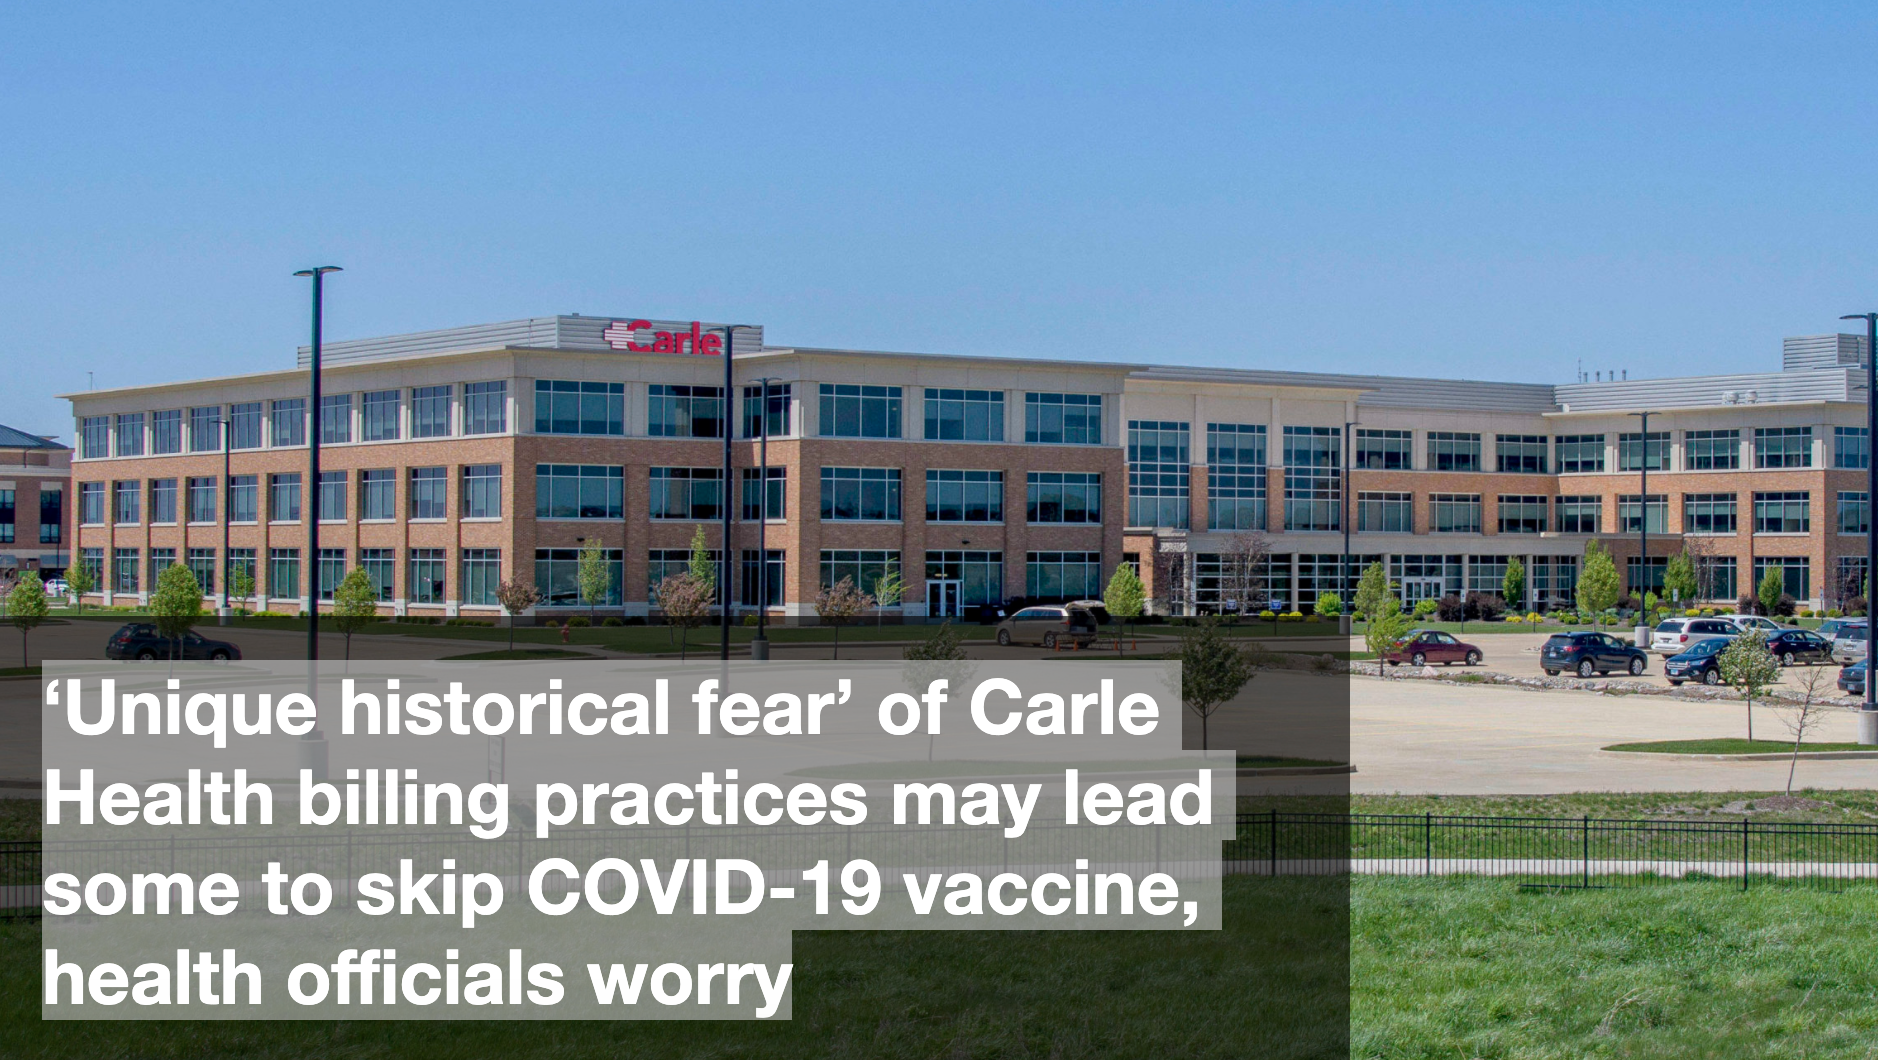 ‘Unique historical fear’ of Carle Health billing practices may lead some to skip COVID-19 vaccine, health officials worry